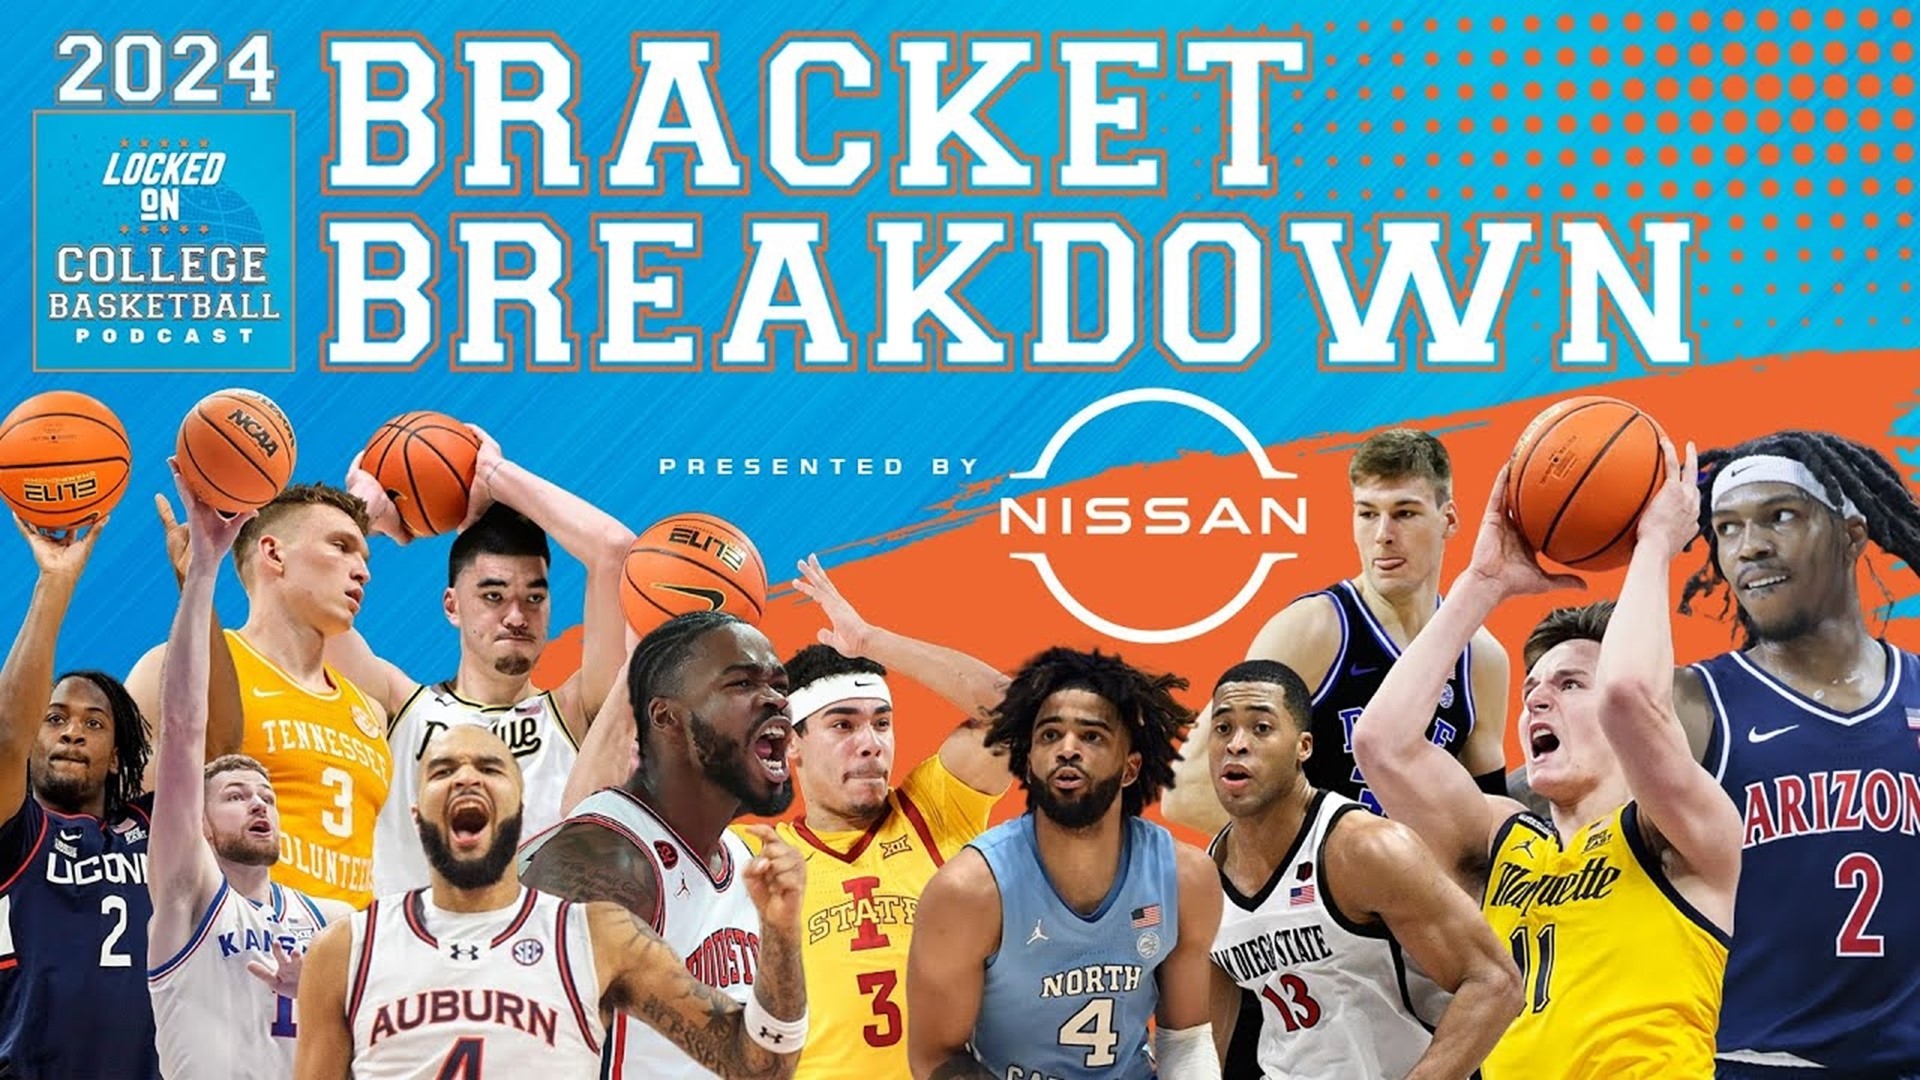 Locked On College Basketball hosts Andy Patton and Isaac Schade join Tenitra Batiste to walk you through this year's bracket step by step to help you win your pool.